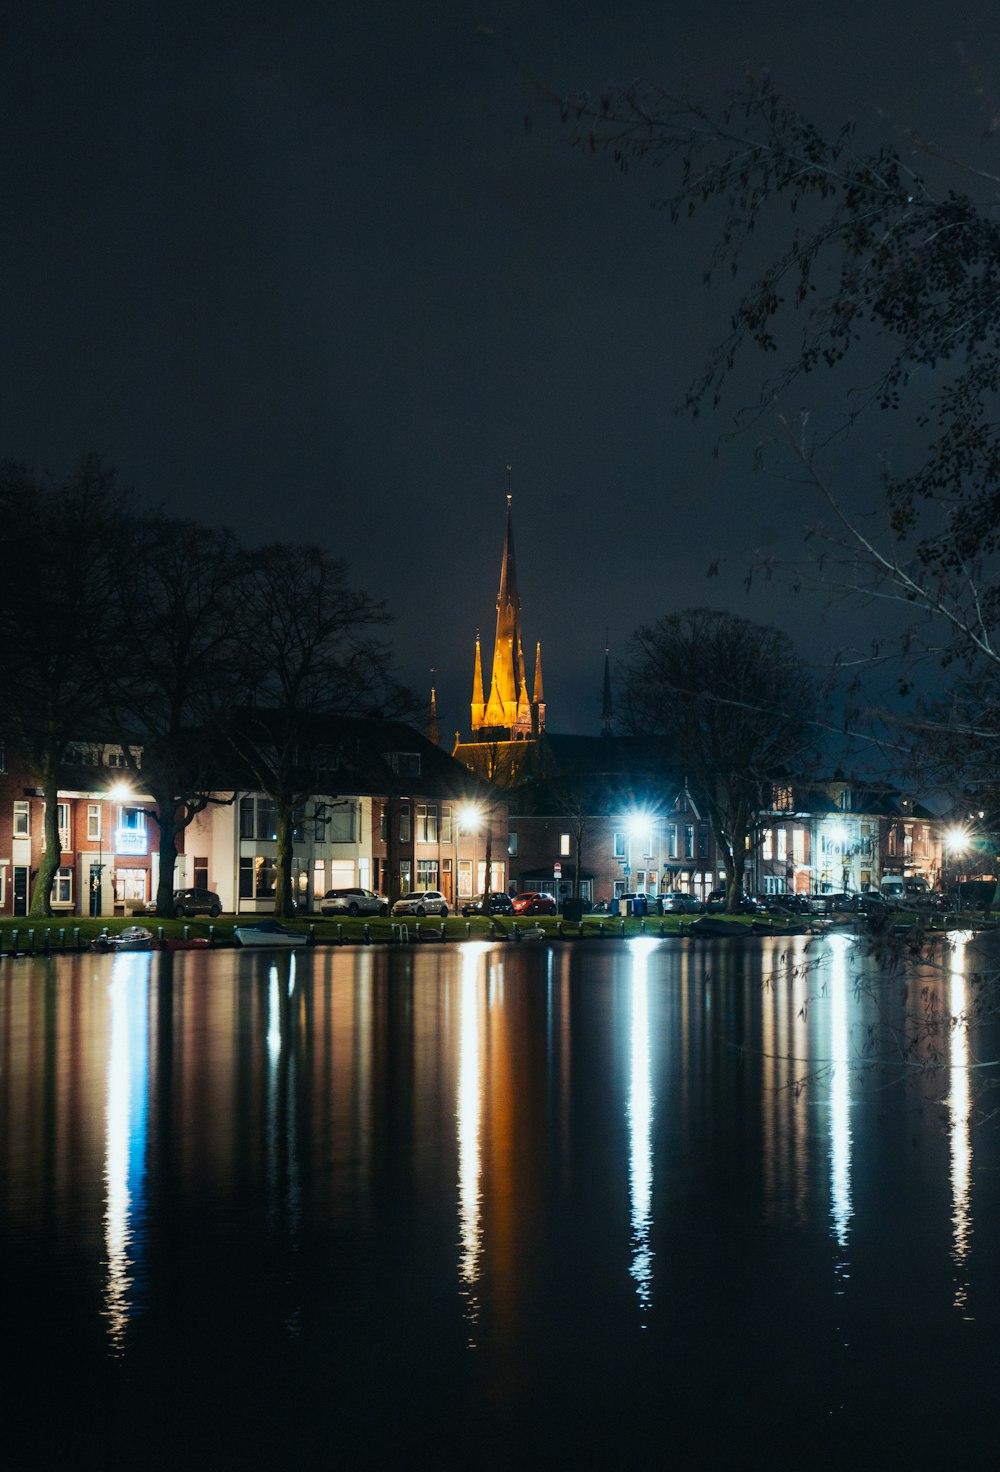 a night view of a lake with a church in the background